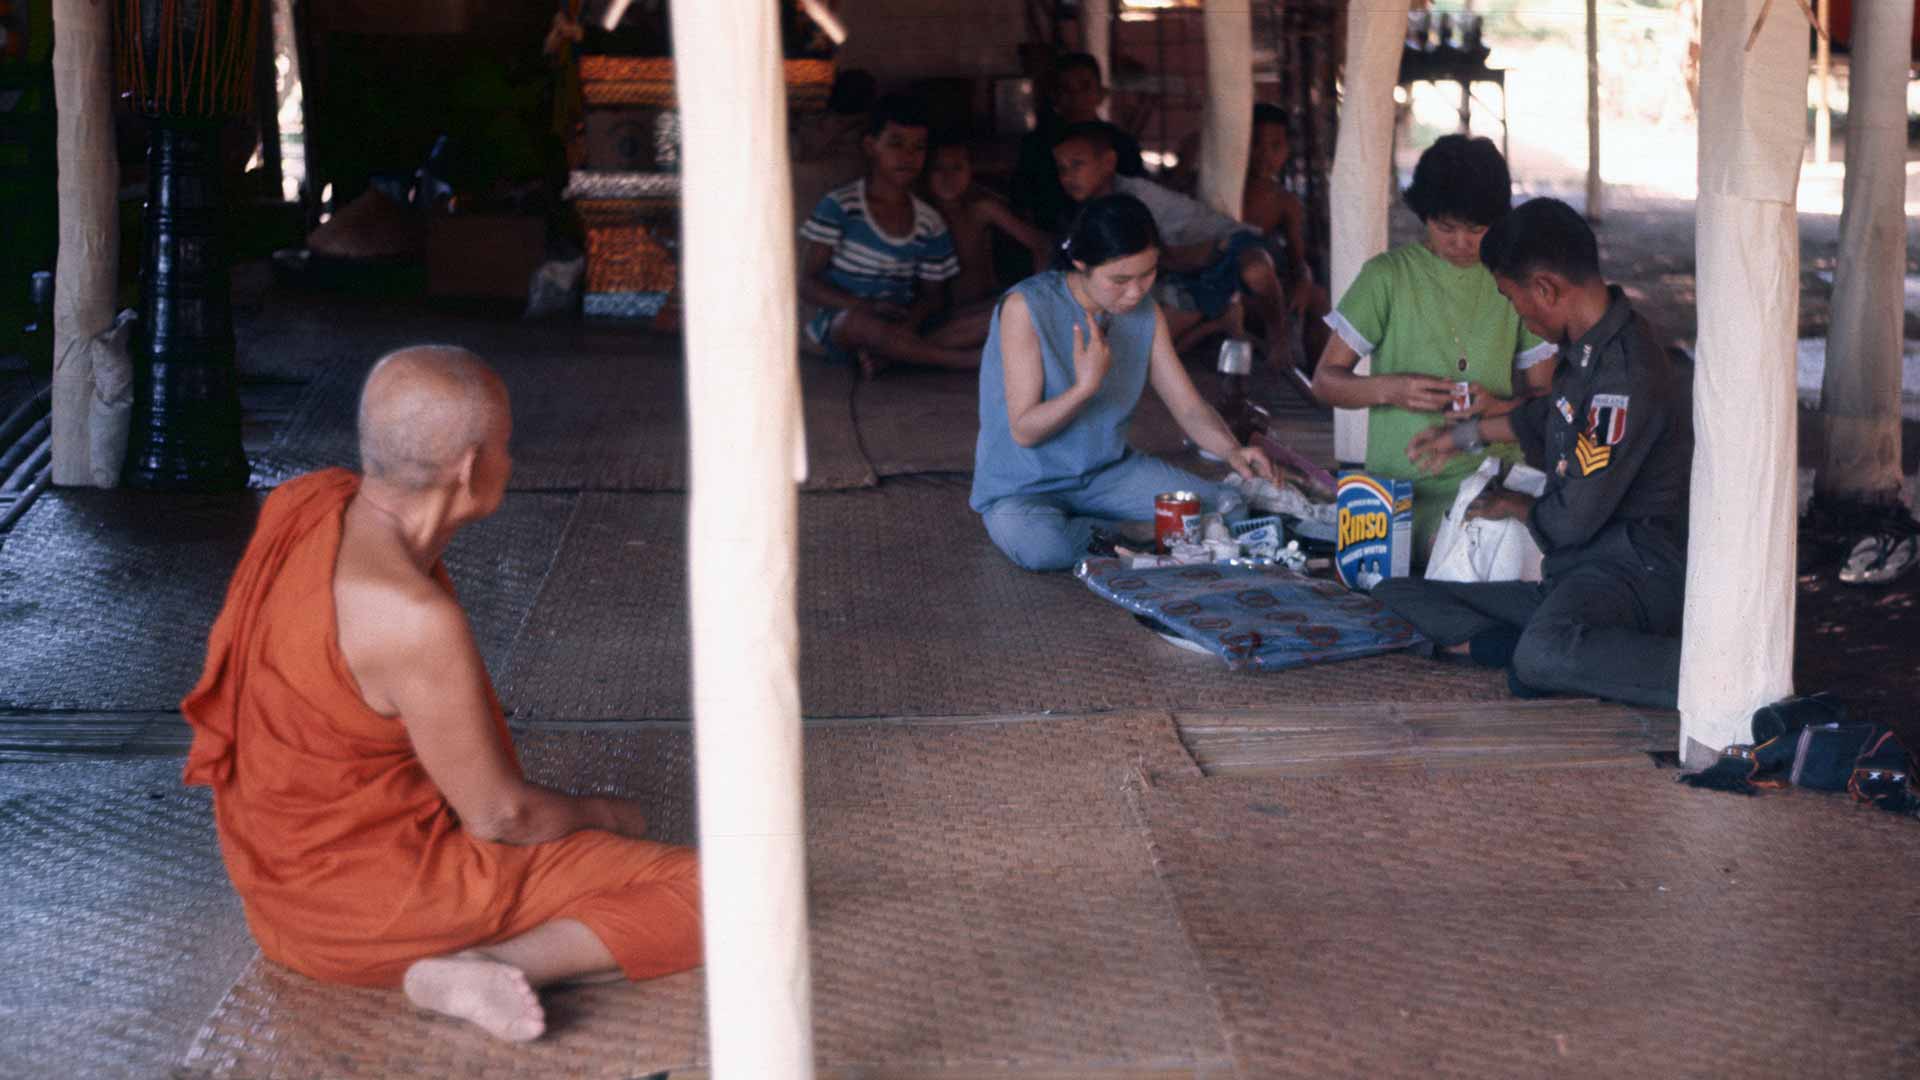 A seated monk looks on as a trio of people prepare gifts on the other side of the room